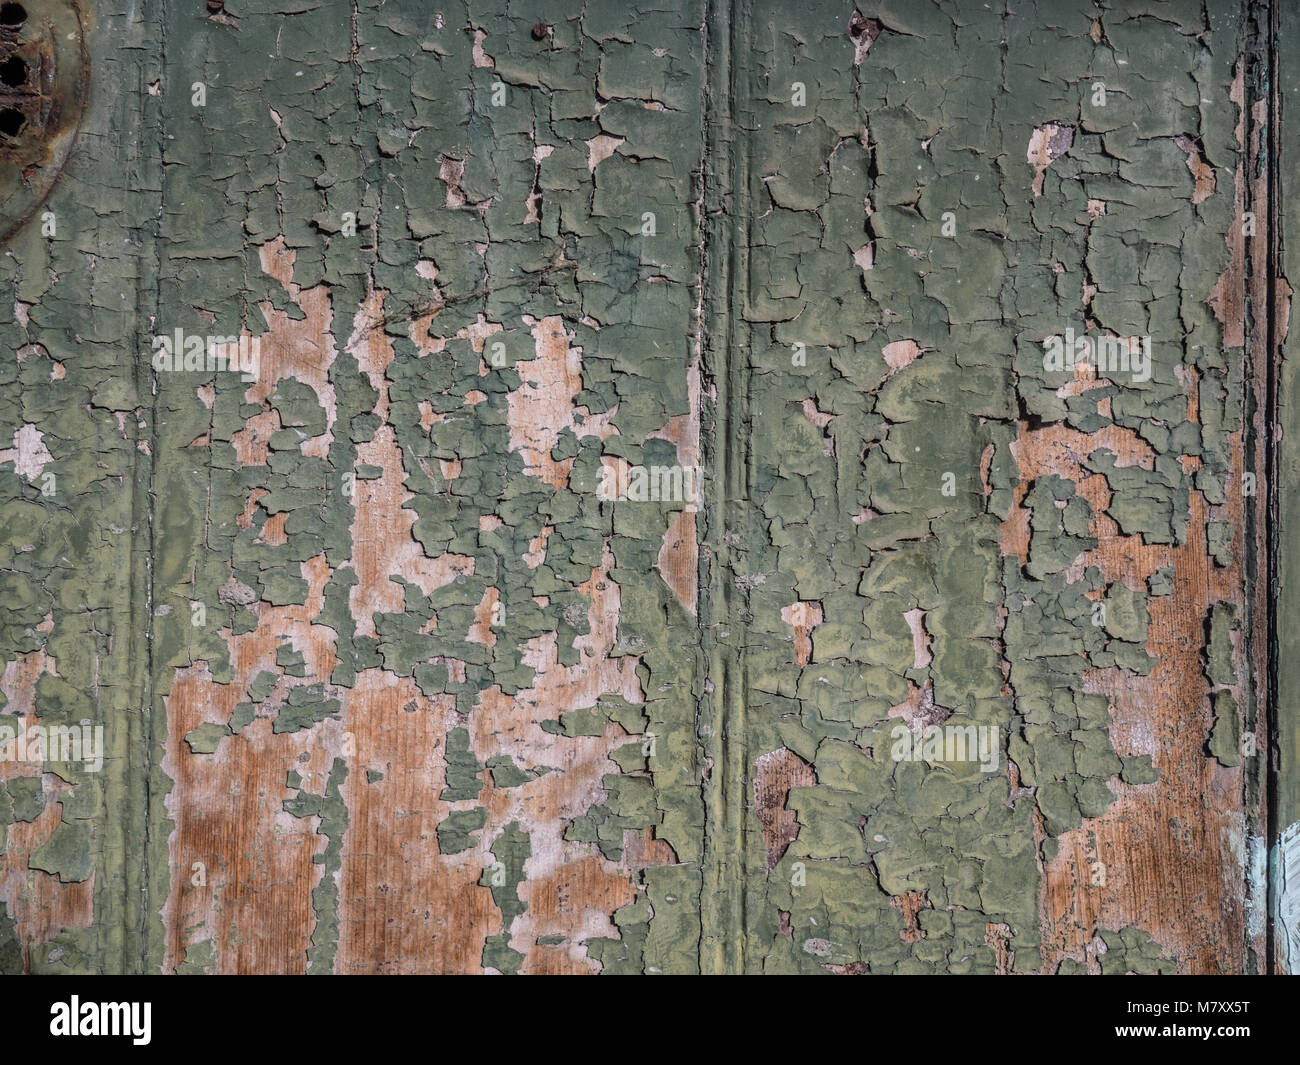 wooden surface with old paint peeling off Stock Photo